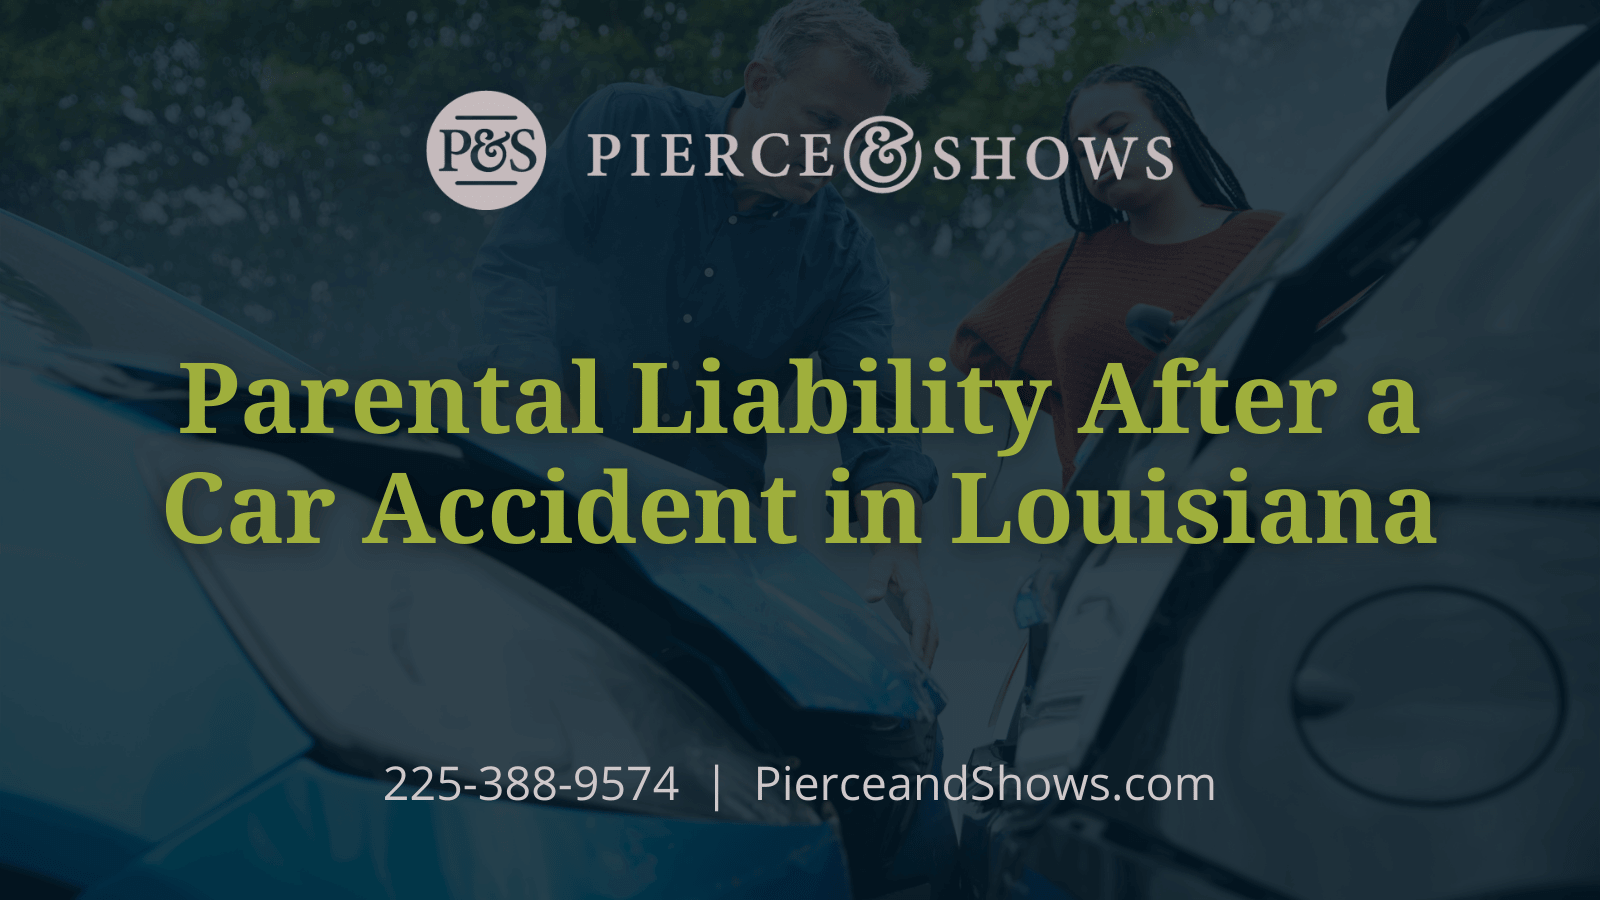 Parental Liability After a Car Accident in Louisiana - Baton Rouge Louisiana injury attorney Pierce & Shows